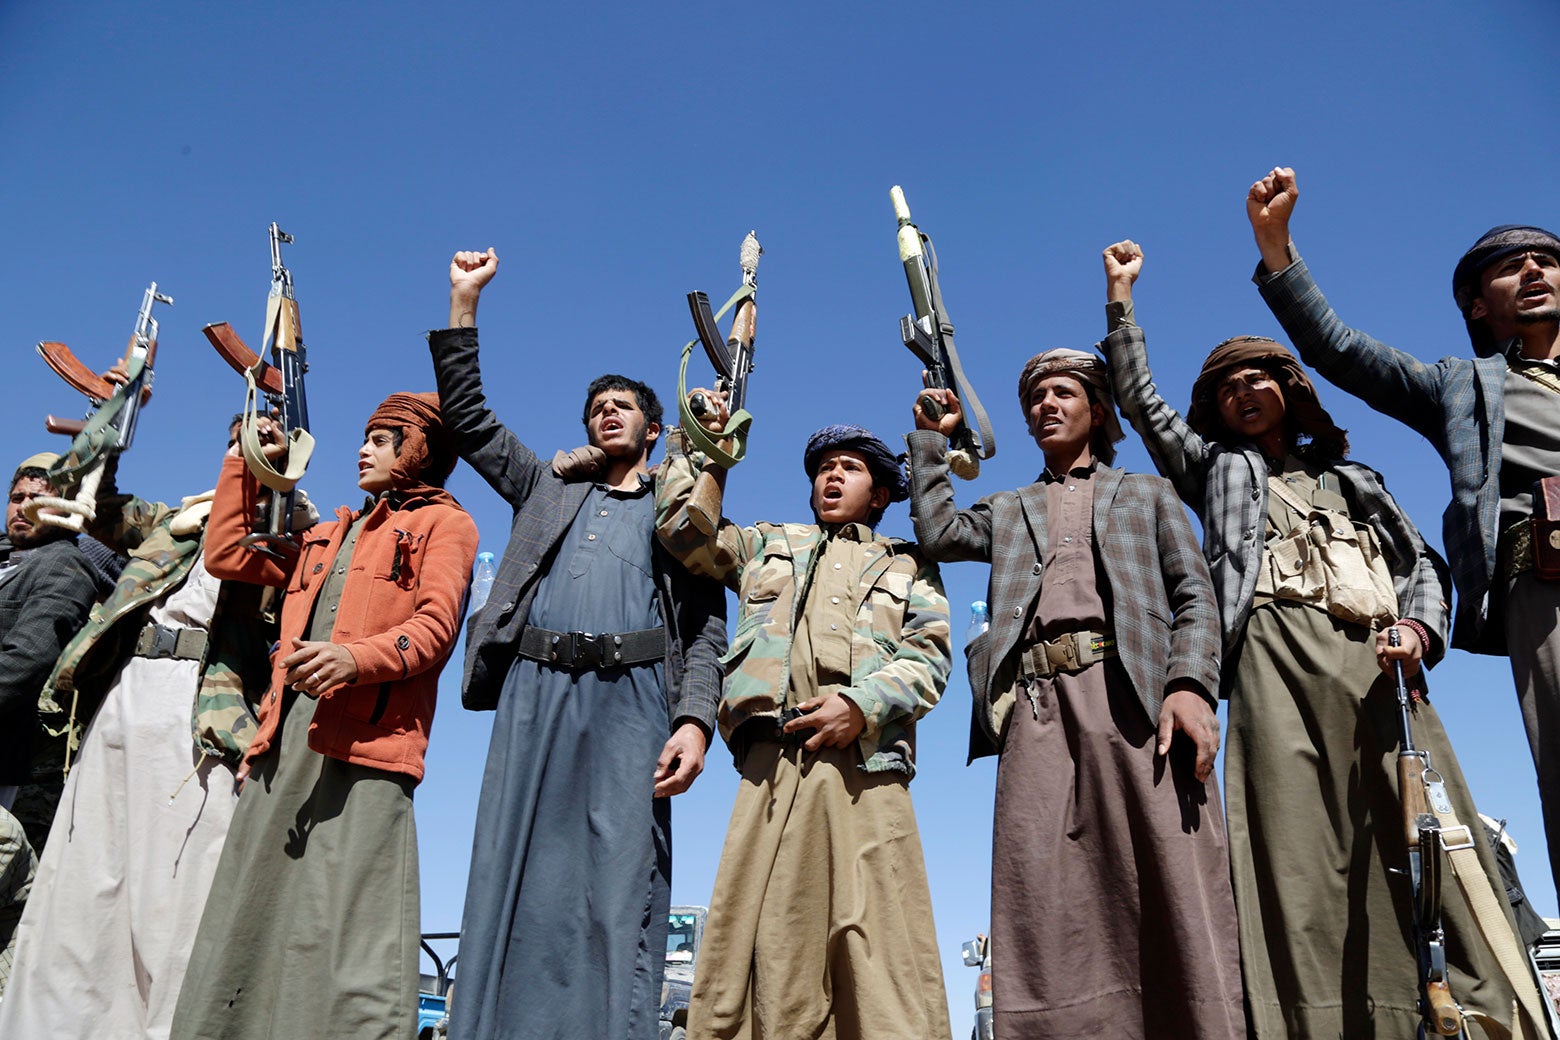 Men in traditional garb hold up rifles and shout.